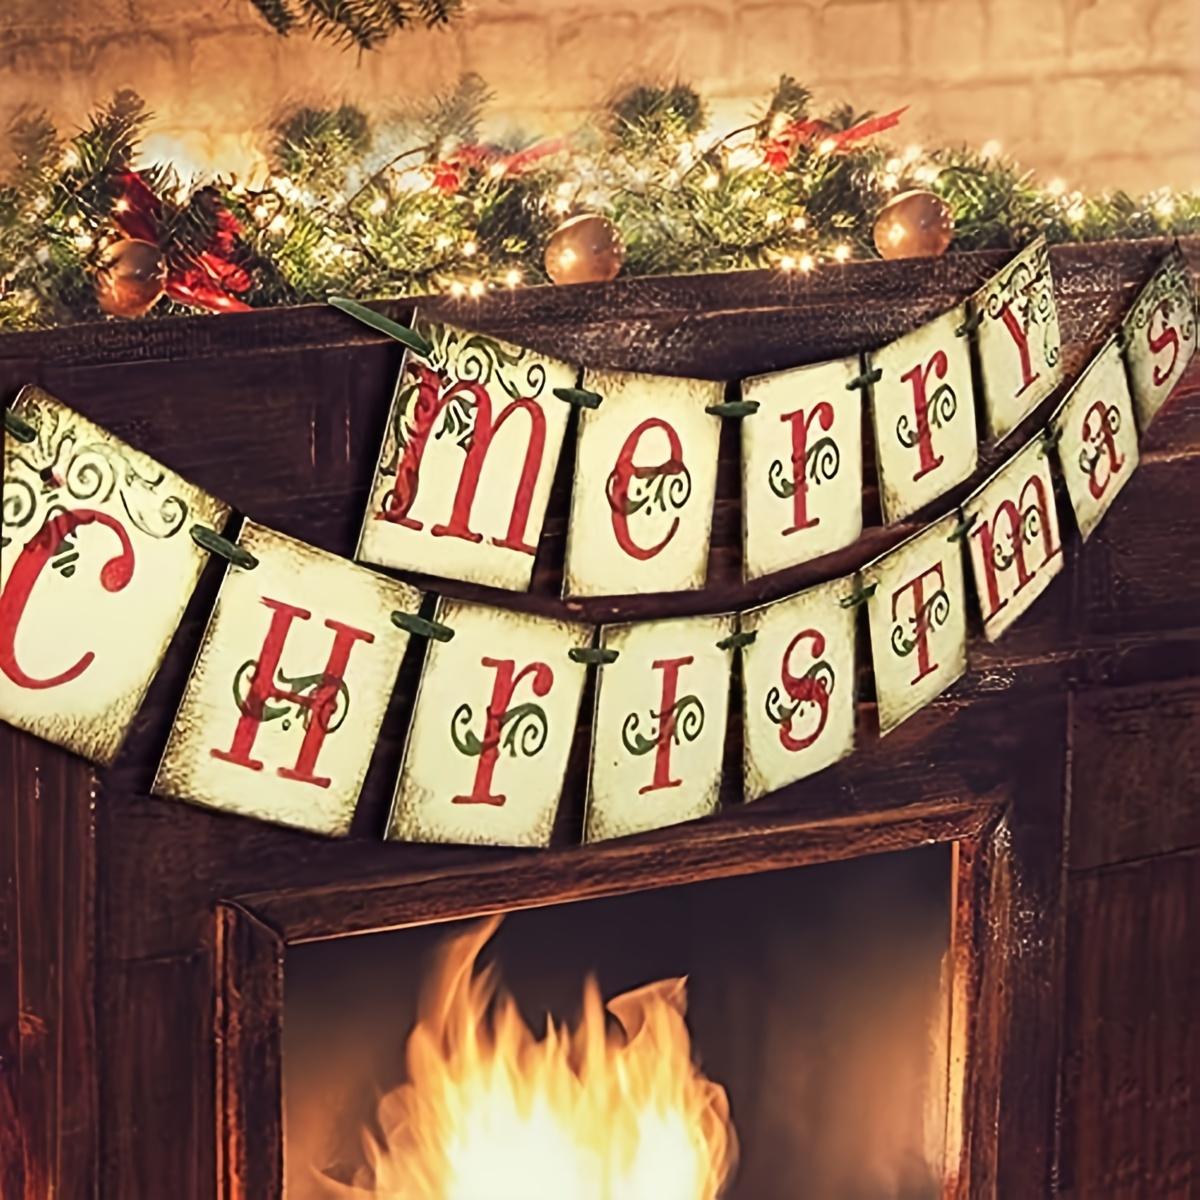 

Merry Christmas Banner Vintage Christmas Decoration, Interior Home Office Party Fireplace Cape Farmhouse Decor For Christmas, Halloween, Thanksgiving